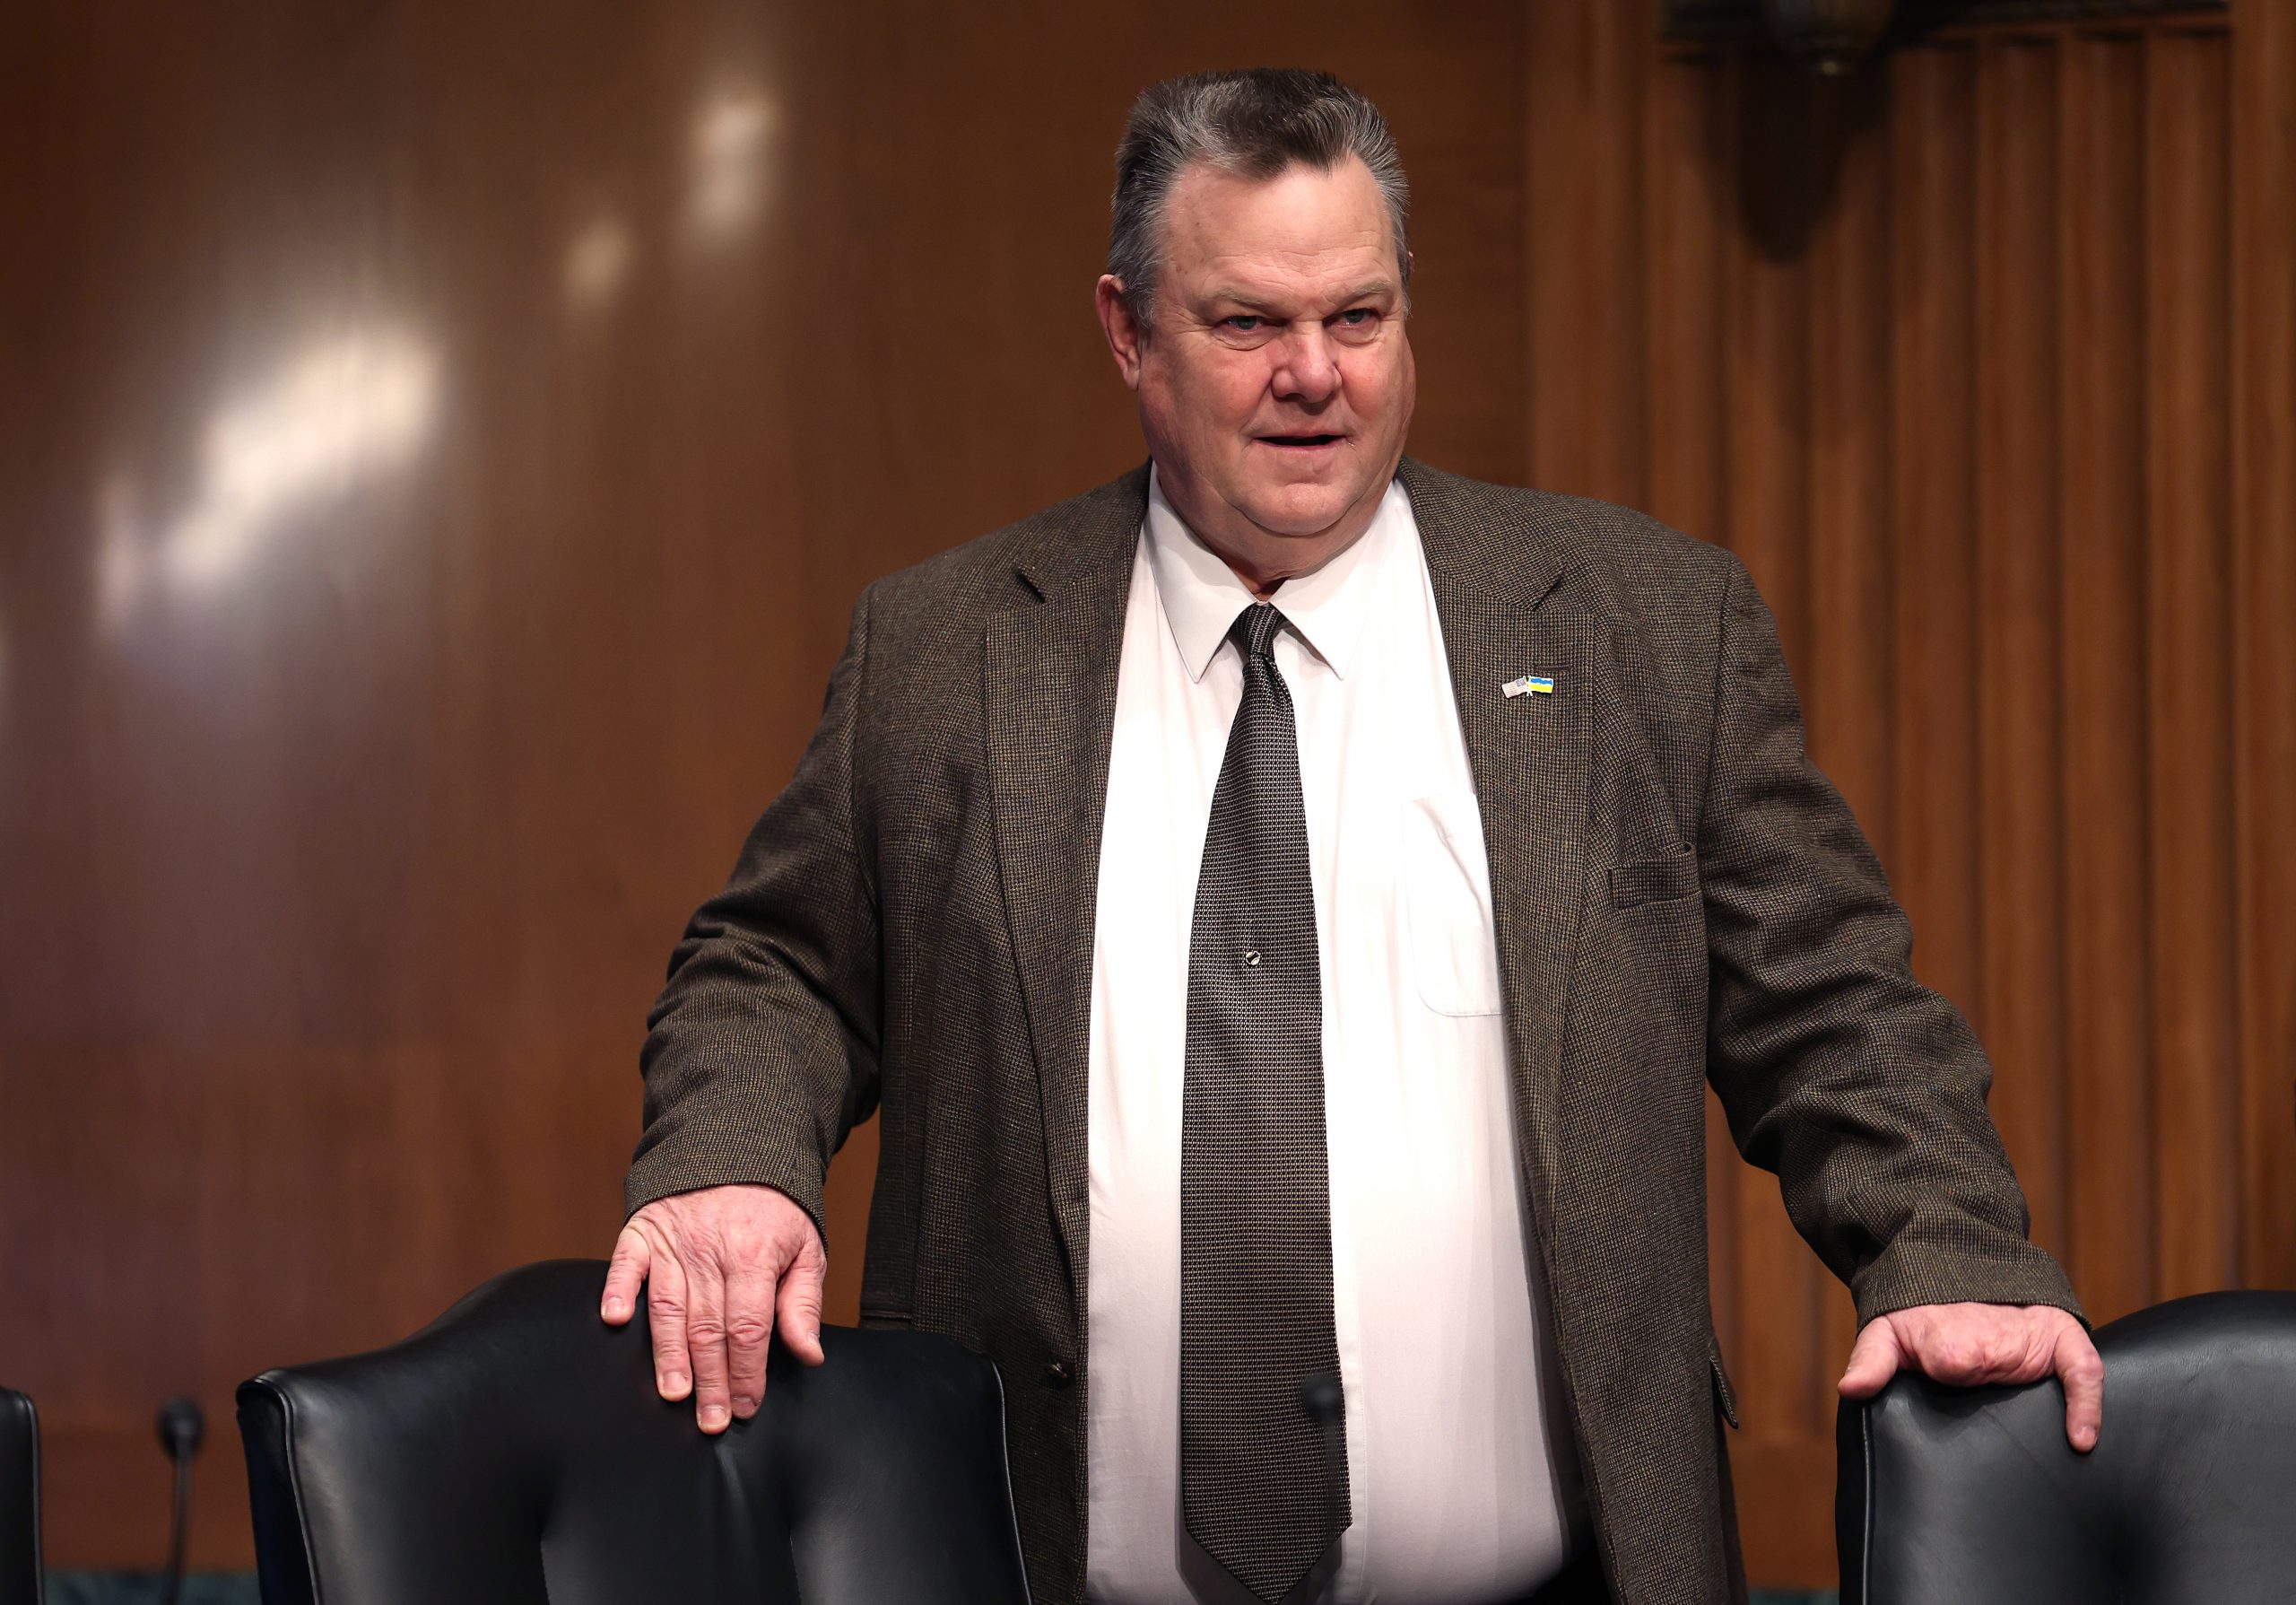 Jon Tester, the Largest Recipient of Lobbyist Cash in America, Dings Opponent for Taking Lobbyist Cash